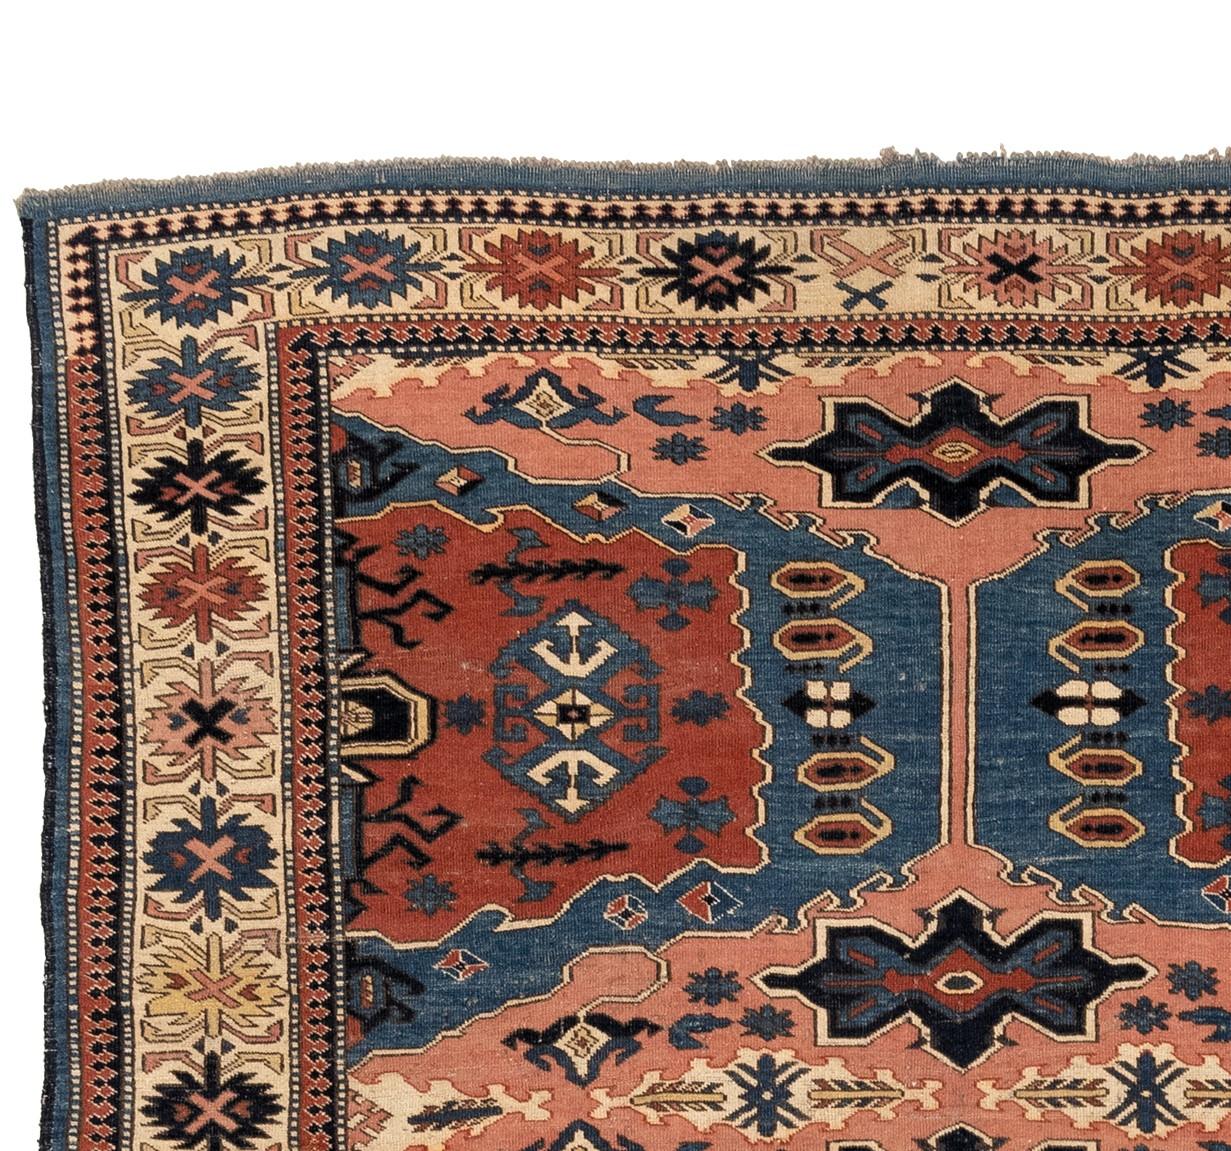 This pinwheel rug is a stunning tribute to the 19th century Kazak pinwheel rugs. Its bold color scheme blends rich blues, peachy tones, and fiery reds with ivory blues, deep navies, and fresh greens to create a mesmerizing display of intricate line